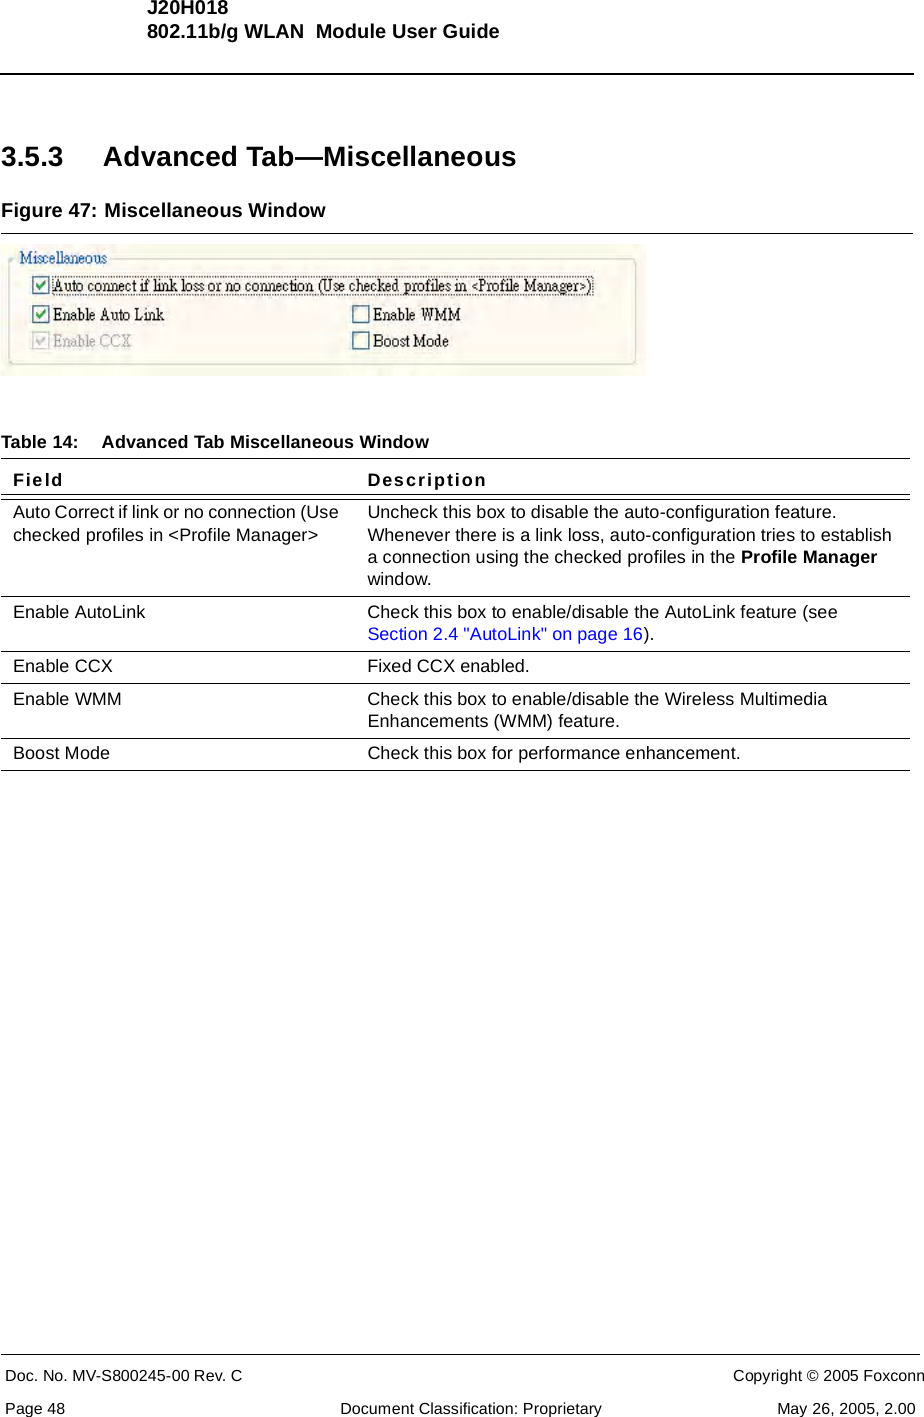 J20H018802.11b/g WLAN  Module User GuideDoc. No. MV-S800245-00 Rev. C  CONFIDENTIAL  Copyright © 2005 FoxconnPage 48  Document Classification: Proprietary May 26, 2005, 2.003.5.3 Advanced Tab—MiscellaneousFigure 47: Miscellaneous WindowTable 14: Advanced Tab Miscellaneous WindowField DescriptionAuto Correct if link or no connection (Use checked profiles in &lt;Profile Manager&gt;Uncheck this box to disable the auto-configuration feature. Whenever there is a link loss, auto-configuration tries to establish a connection using the checked profiles in the Profile Managerwindow.Enable AutoLink Check this box to enable/disable the AutoLink feature (see Section 2.4 &quot;AutoLink&quot; on page 16).Enable CCX Fixed CCX enabled.Enable WMM Check this box to enable/disable the Wireless Multimedia Enhancements (WMM) feature.Boost Mode  Check this box for performance enhancement.